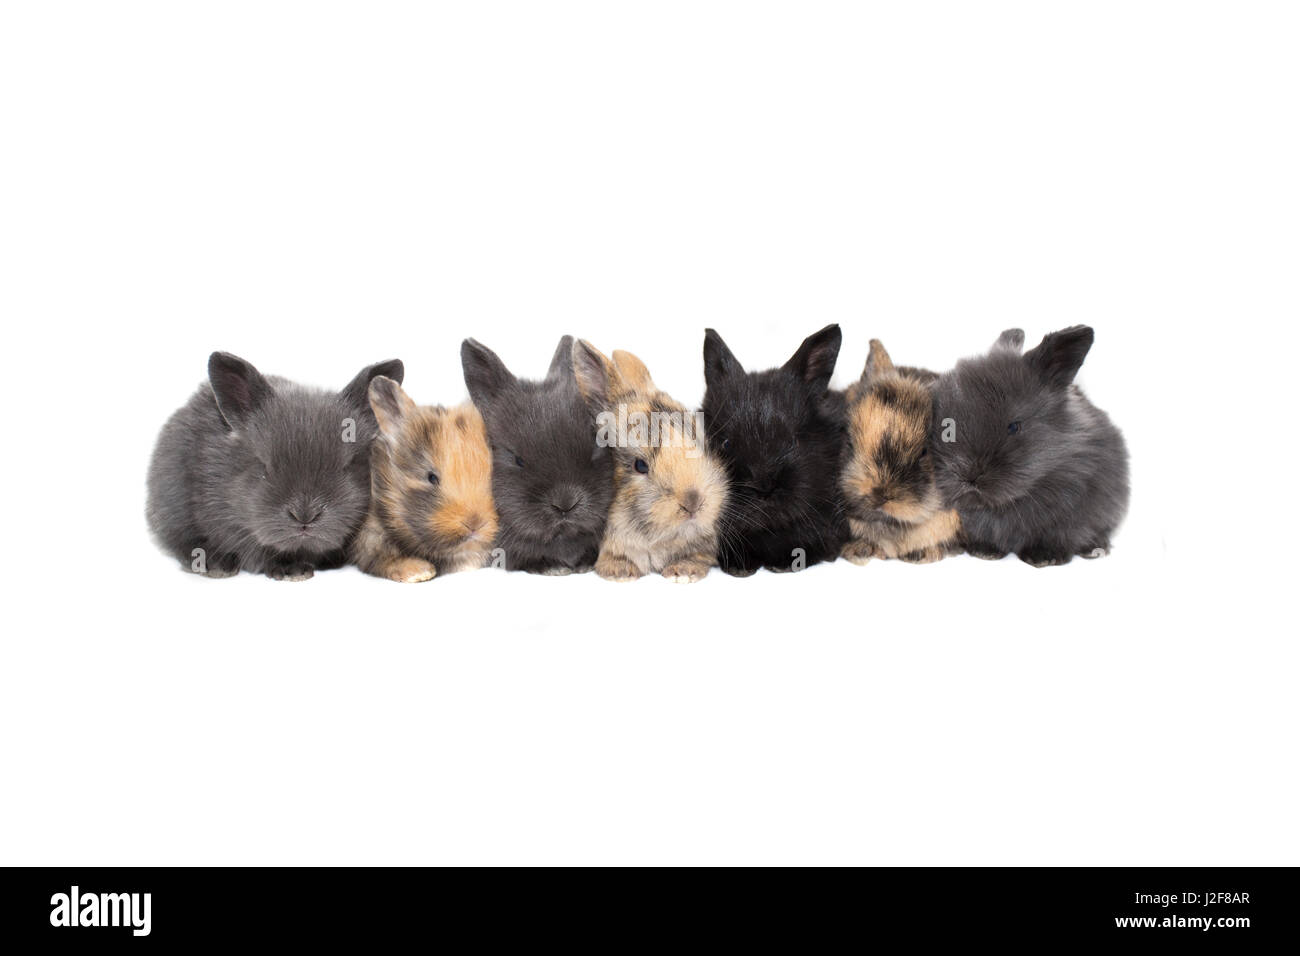 Line-up of baby bunnies Banque D'Images